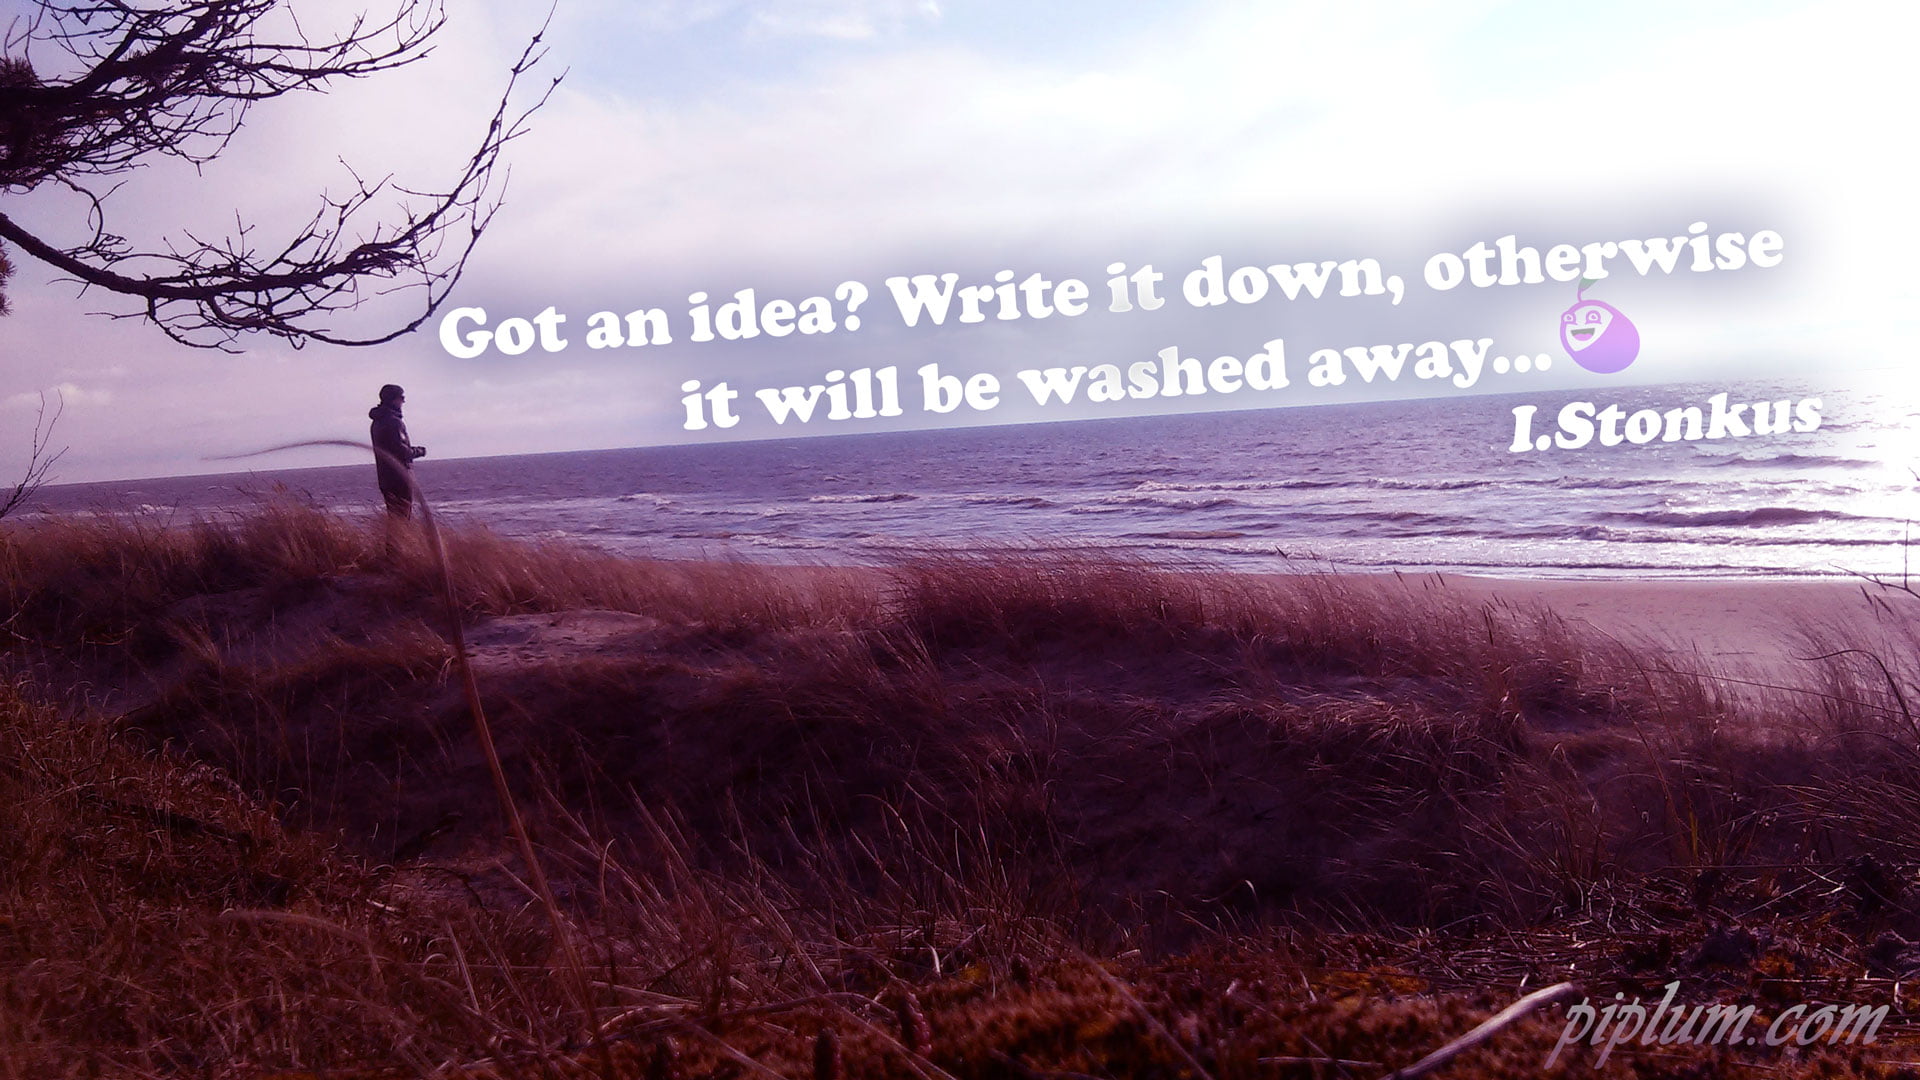 Got-an-idea-Write-it-down-otherwise-it-will-be-washed-away-motivational-quote